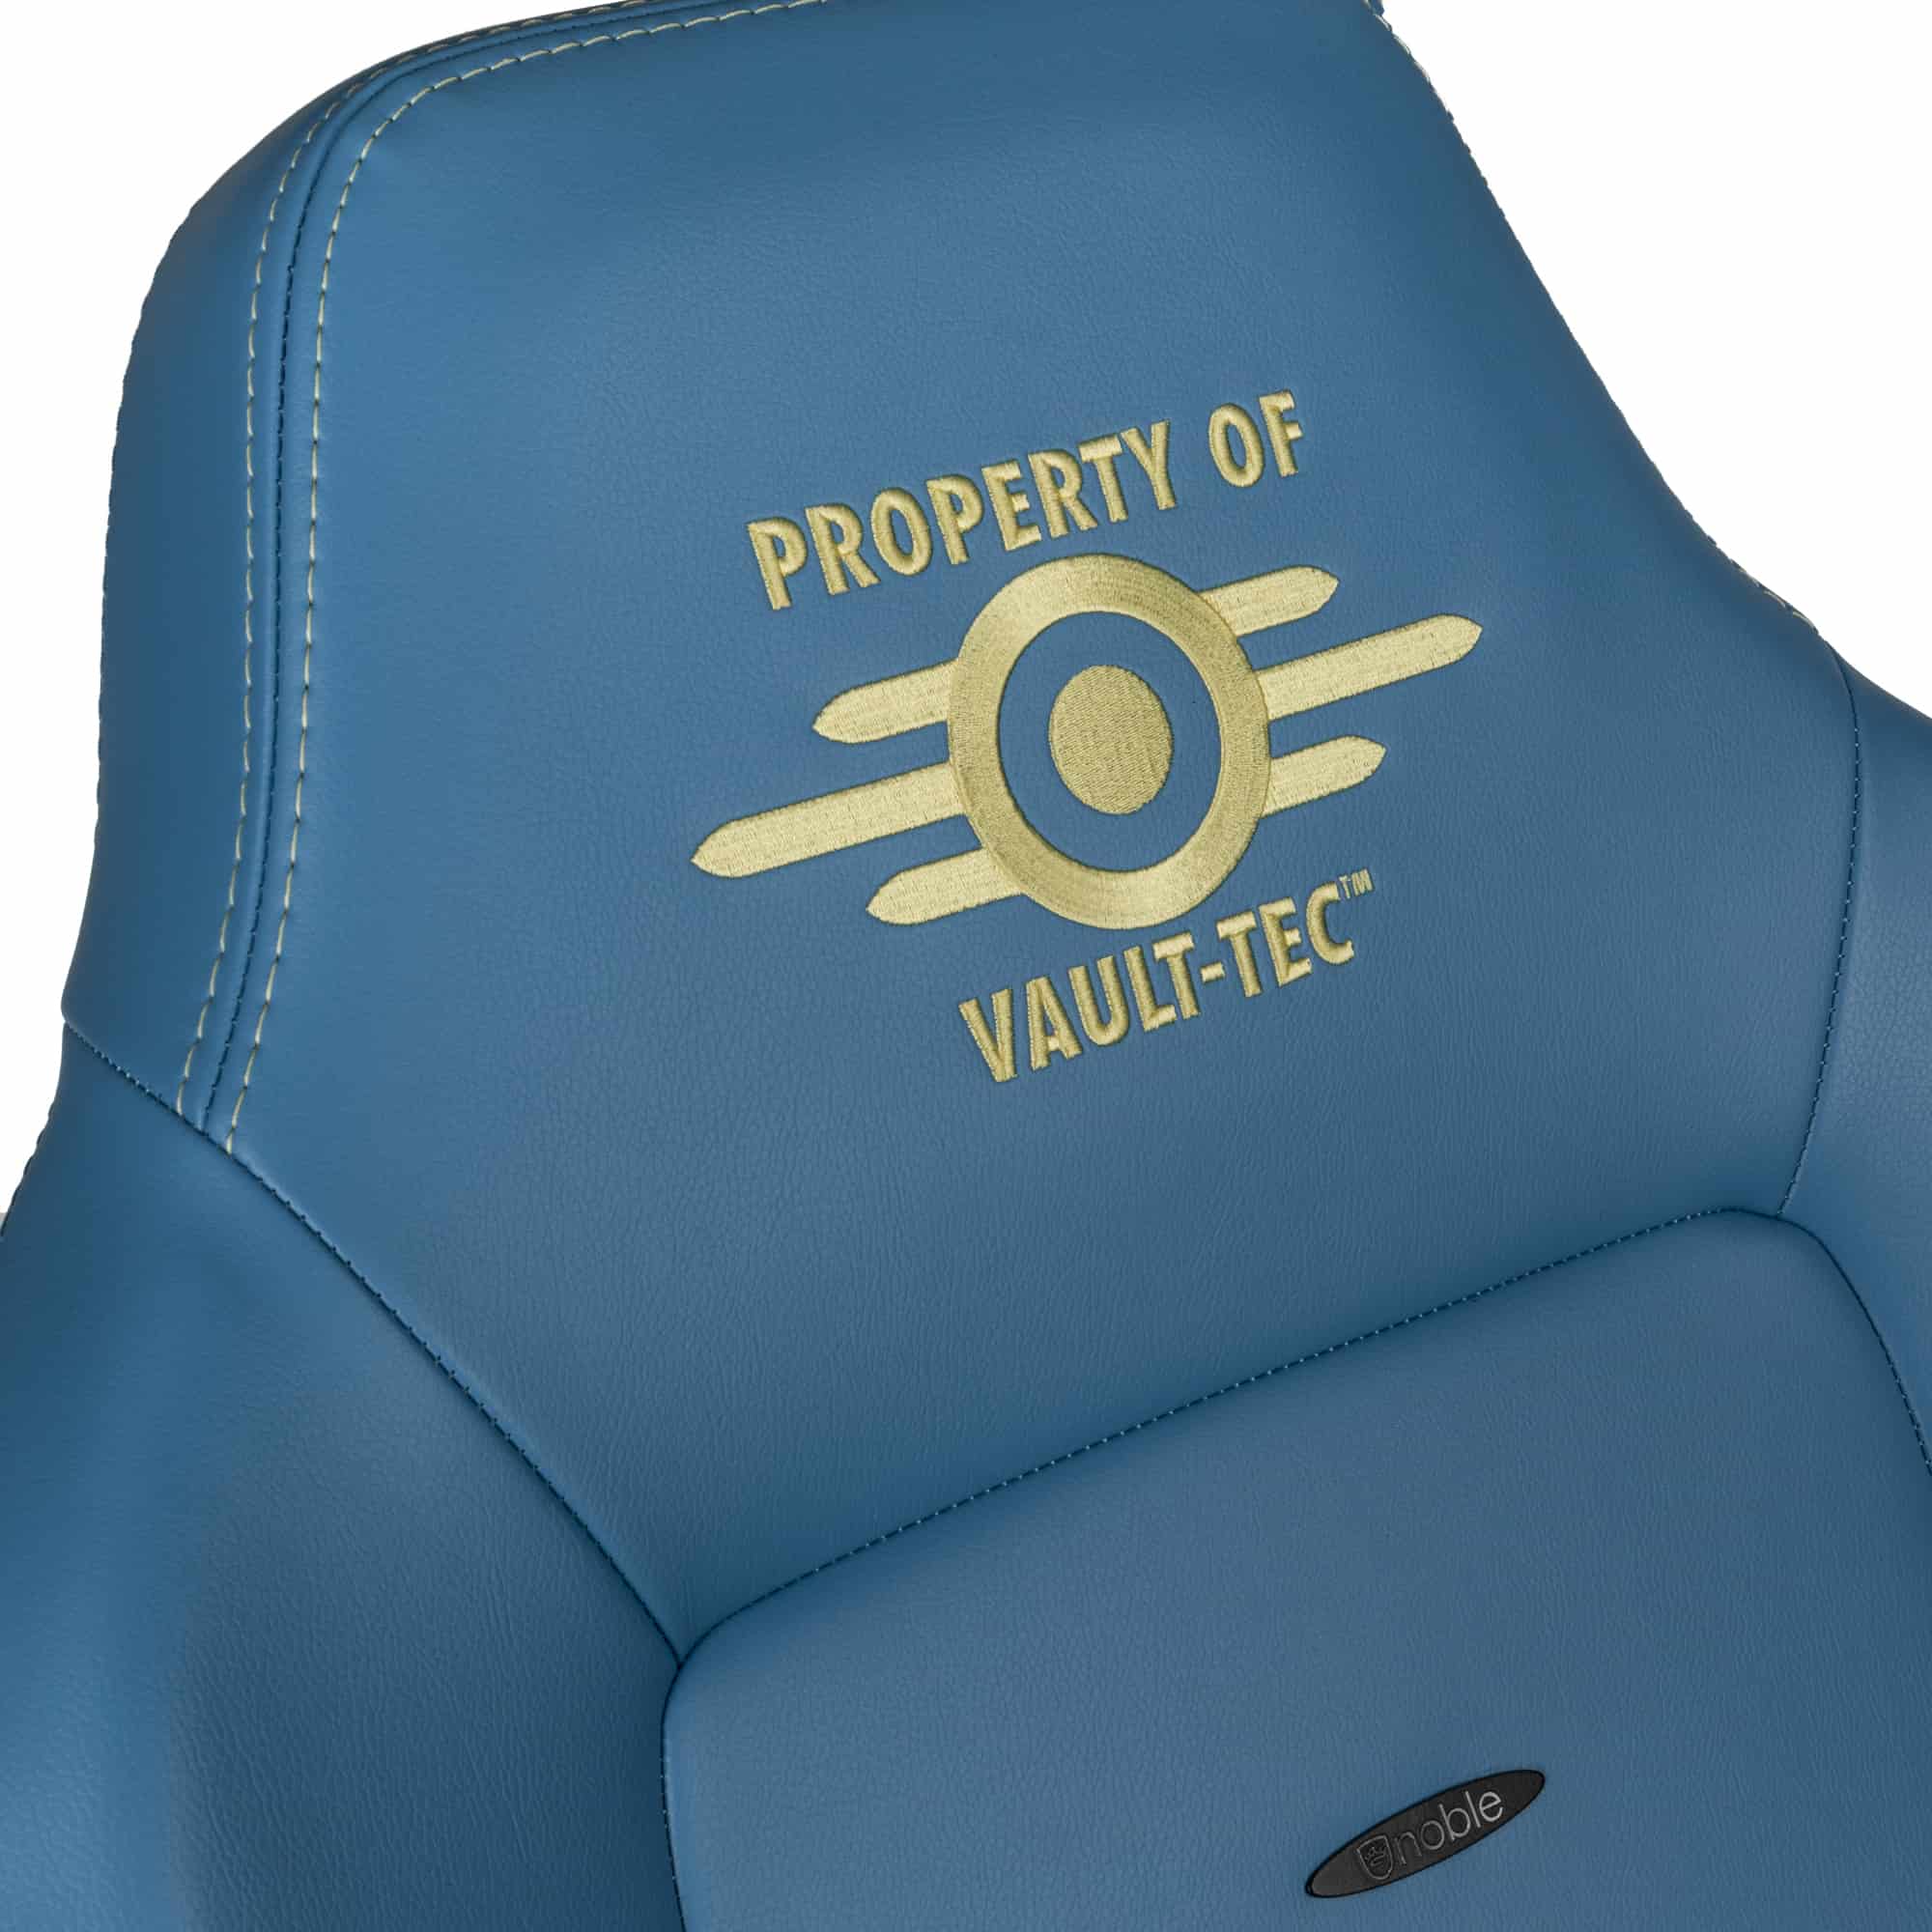 Gaming Chair noblechairs HERO Fallout Vault Tec Special Edition